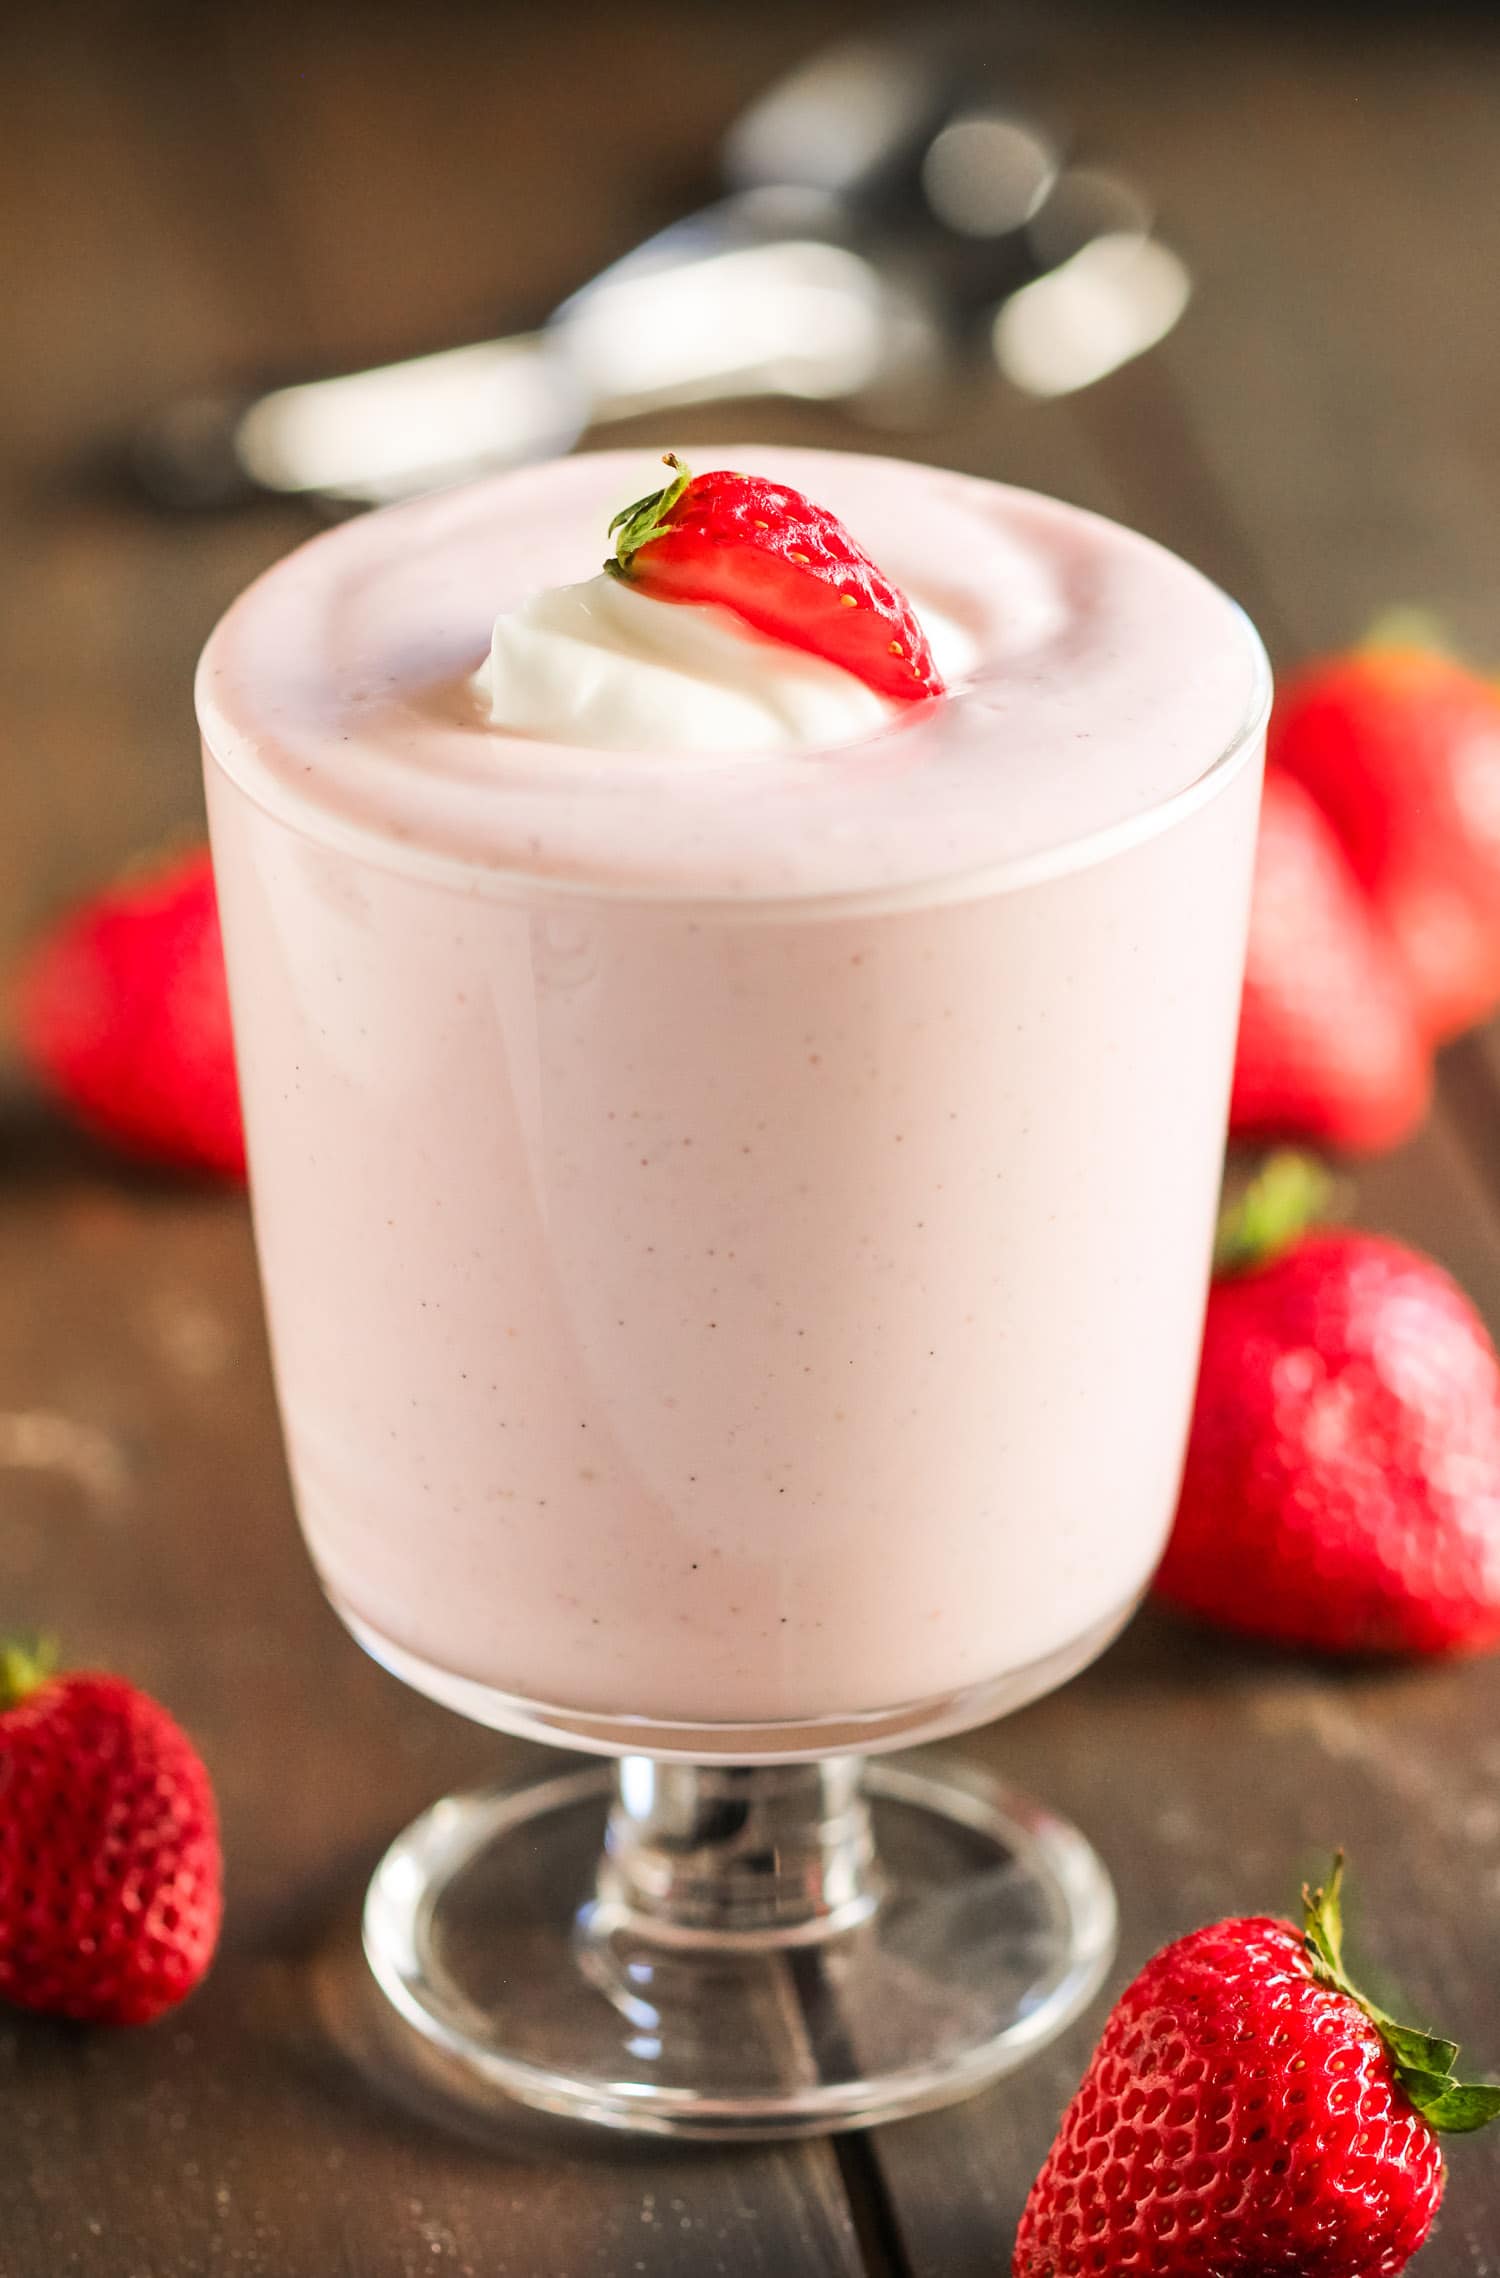 This Healthy Strawberry Cheesecake Dip is super creamy and packed with fresh strawberry puree. It has all the flavor of cheesecake in the form of a dip! It has only 70 calories, 1.5g fat, and NO added sugar! Perfect for dipping graham crackers, strawberries, or spoons alone. Healthy Dessert Recipes with sugar free, low calorie, low fat, low carb, high protein, gluten free, dairy free, vegan, and raw options at the Desserts With Benefits Blog (www.DessertsWithBenefits.com)